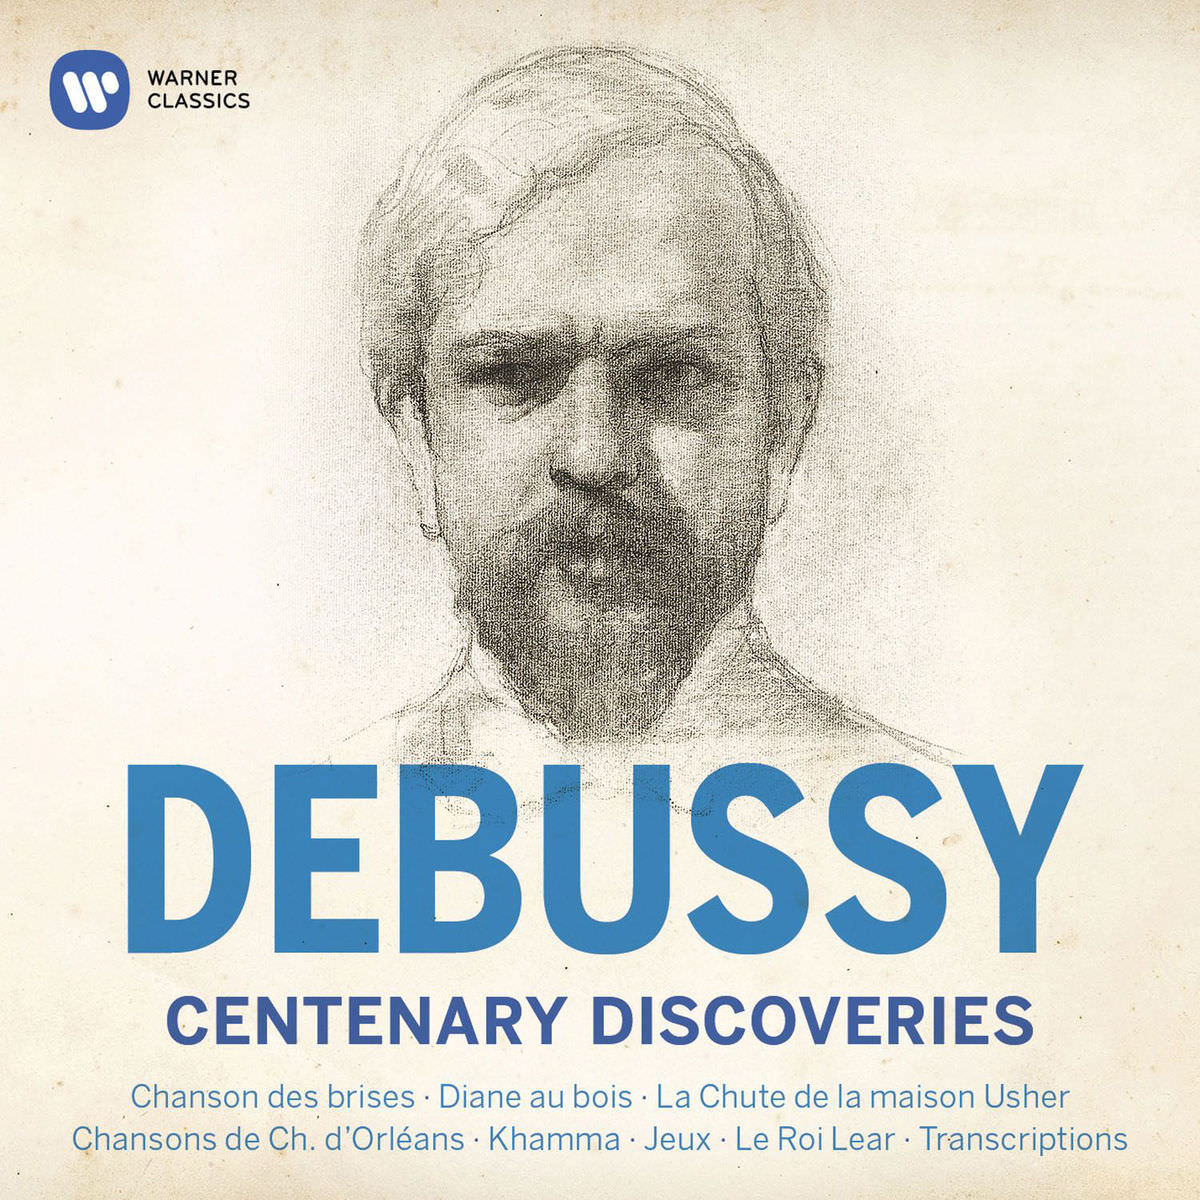 Claude Debussy - Debussy Centenary Discoveries (2018) [FLAC 24bit/96kHz]